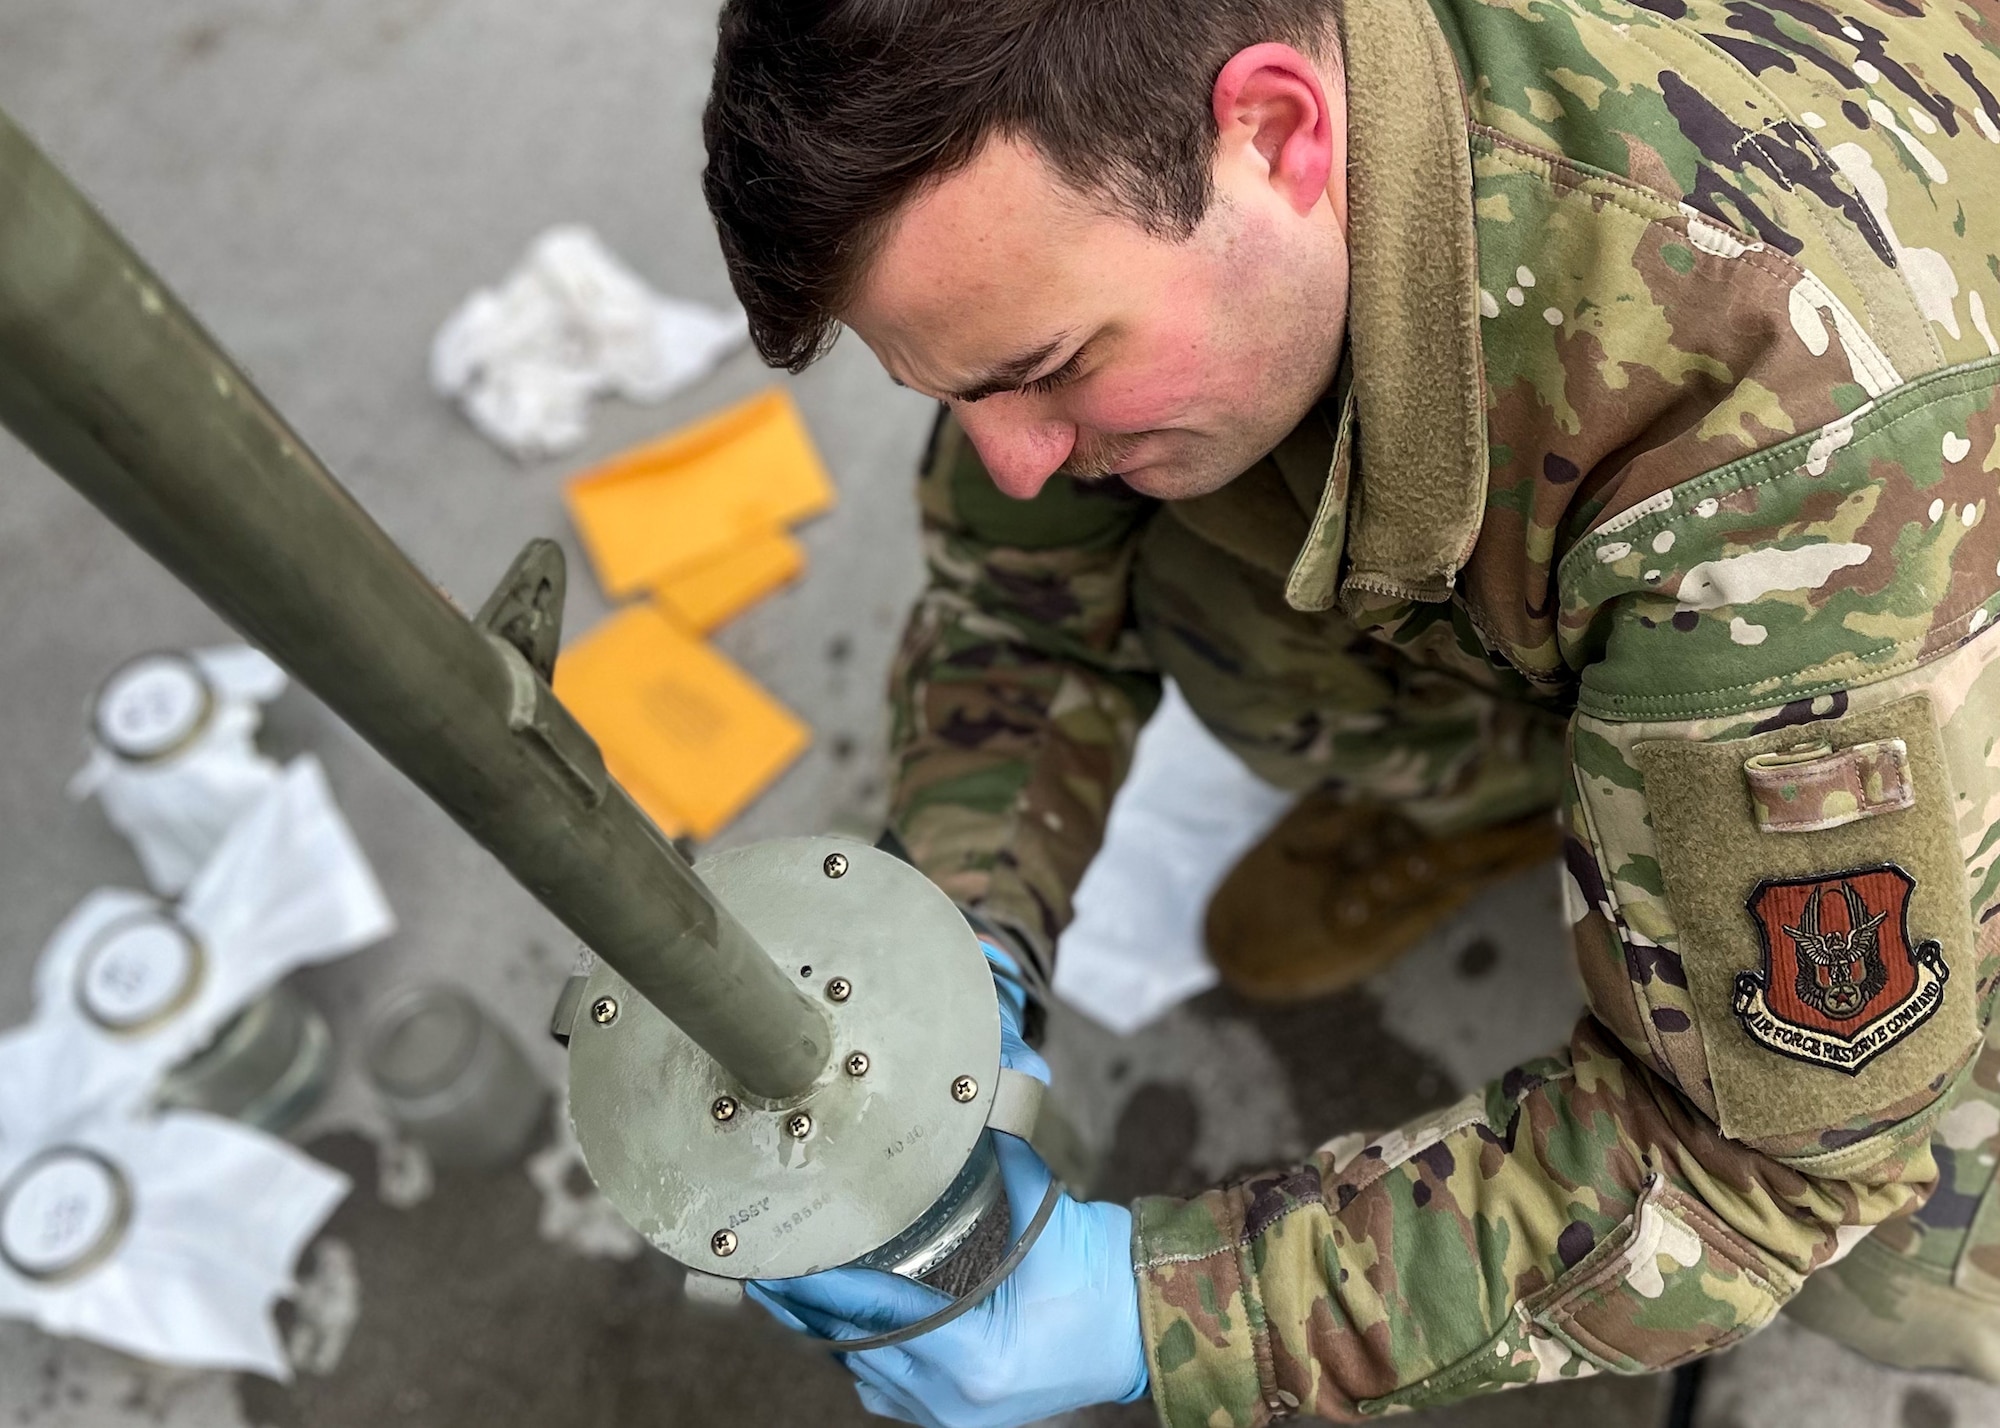 Staff Sgt. Kyle Frejofsky, an aircraft fuel system specialist assigned to the 910th Maintenance Squadron, tests the fuel in a C-130H Hercules aircraft assigned to the 910th Airlift Wing on Jan. 10, 2023, at Mountain Home Air Force Base, Idaho.